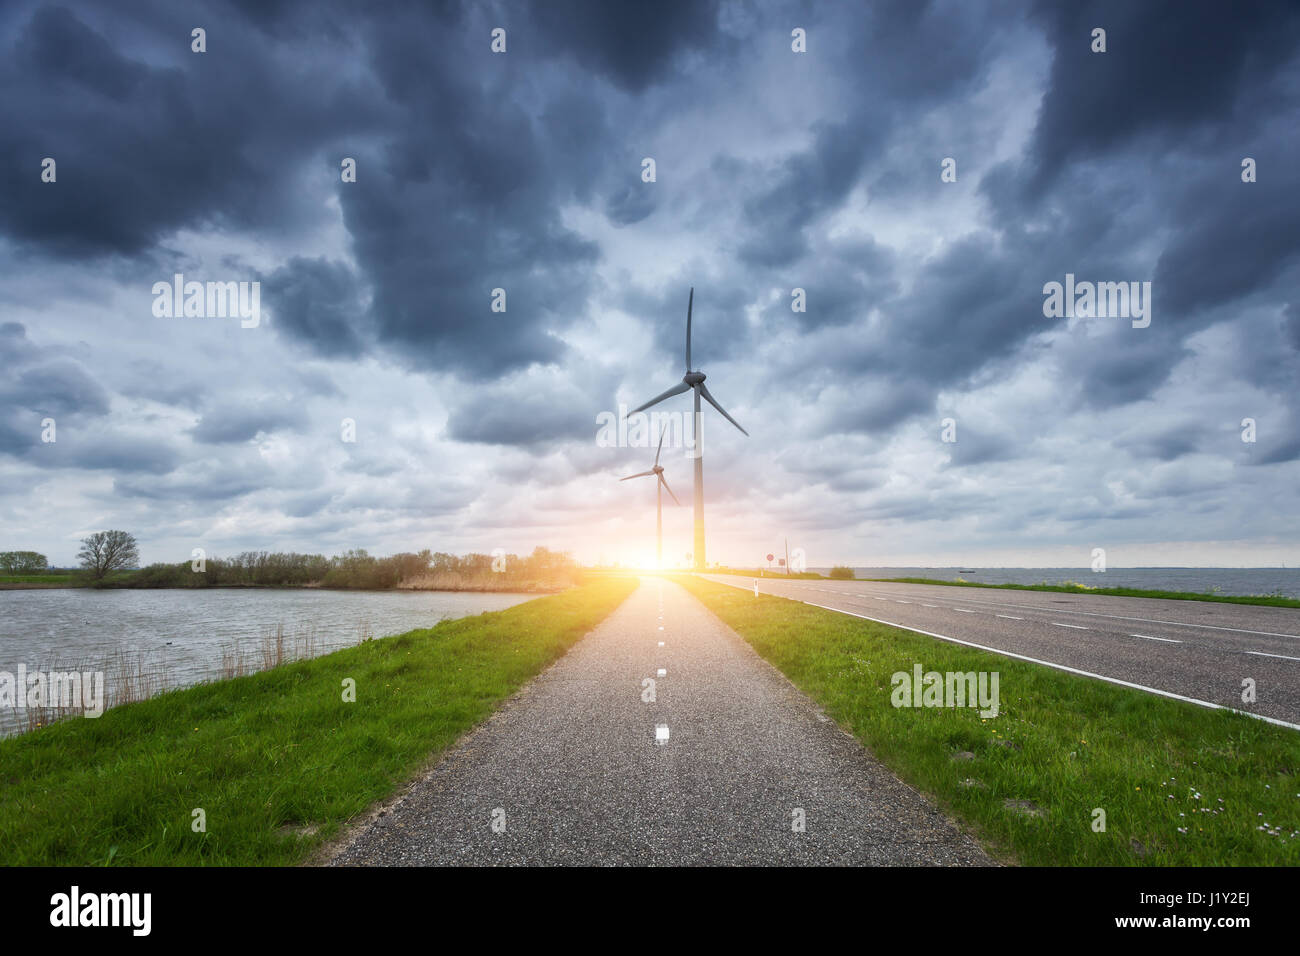 Beautiful asphalt road with wind turbines generating electricity at sunset. Windmills for electric power production. Landscape with road, green grass  Stock Photo